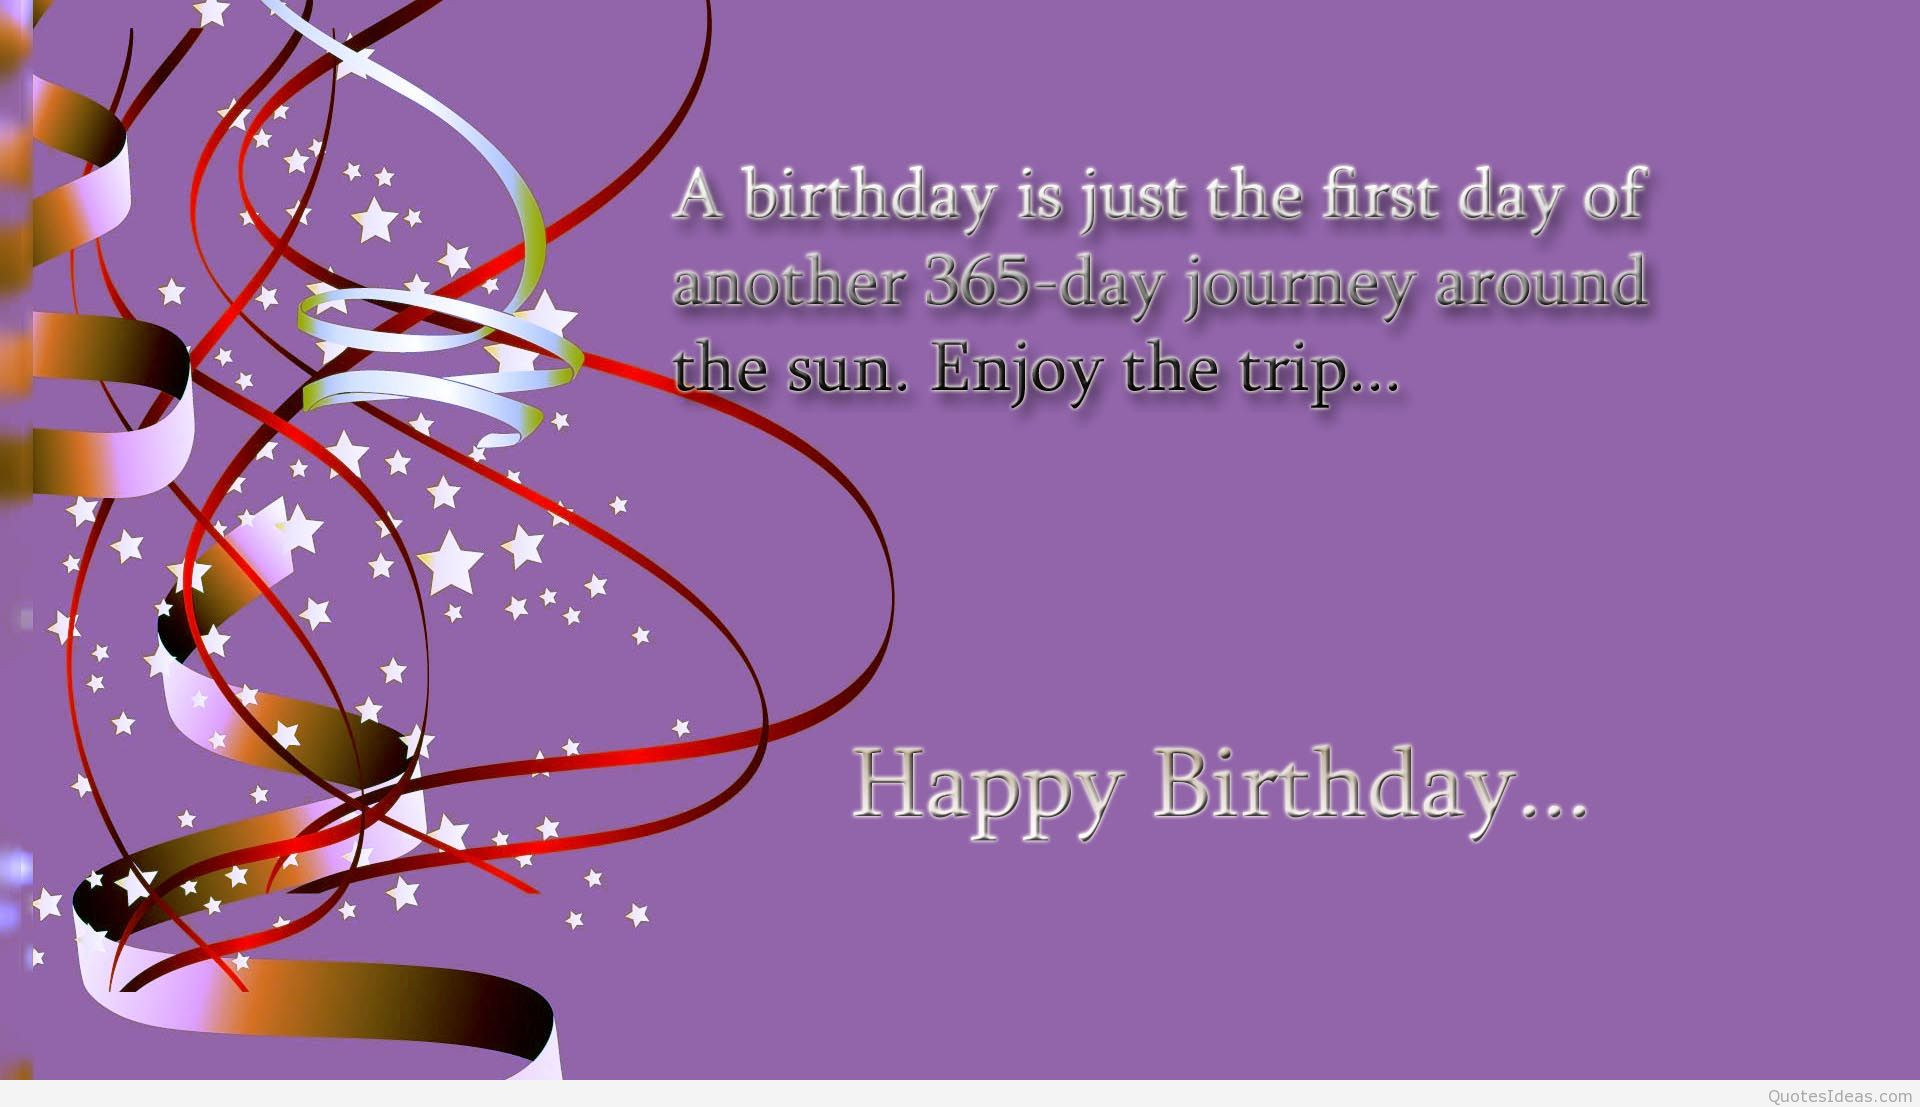 Happy Birthday Images And Quotes
 Sister birthday